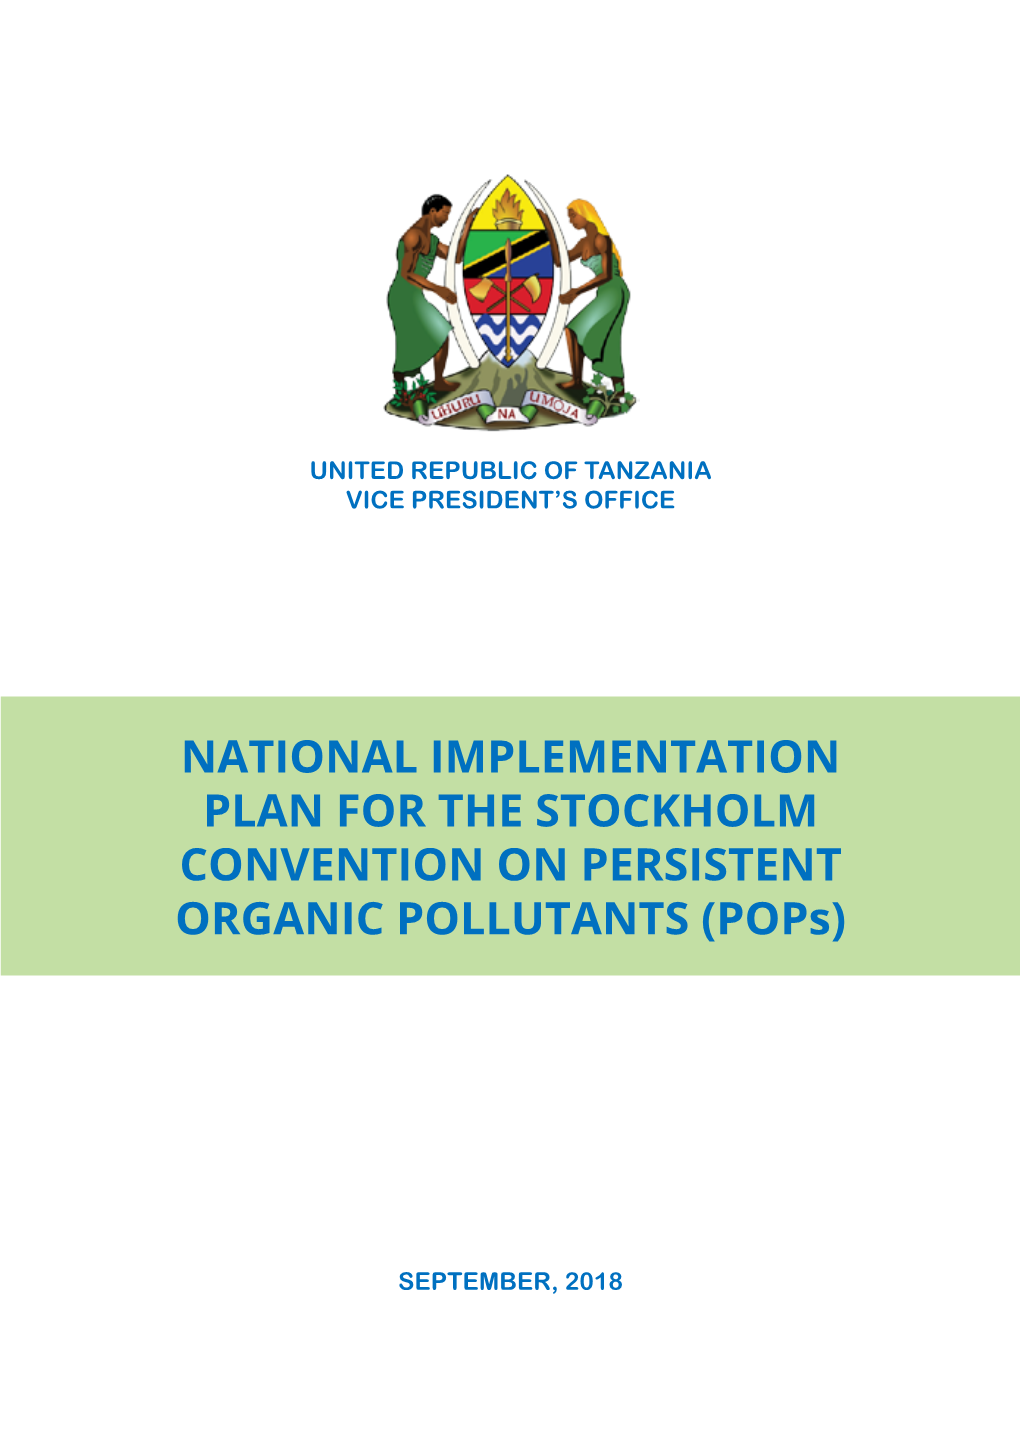 National Implementation Plan for the Stockholm Convention on Persistent Organic Pollutants (Pops)